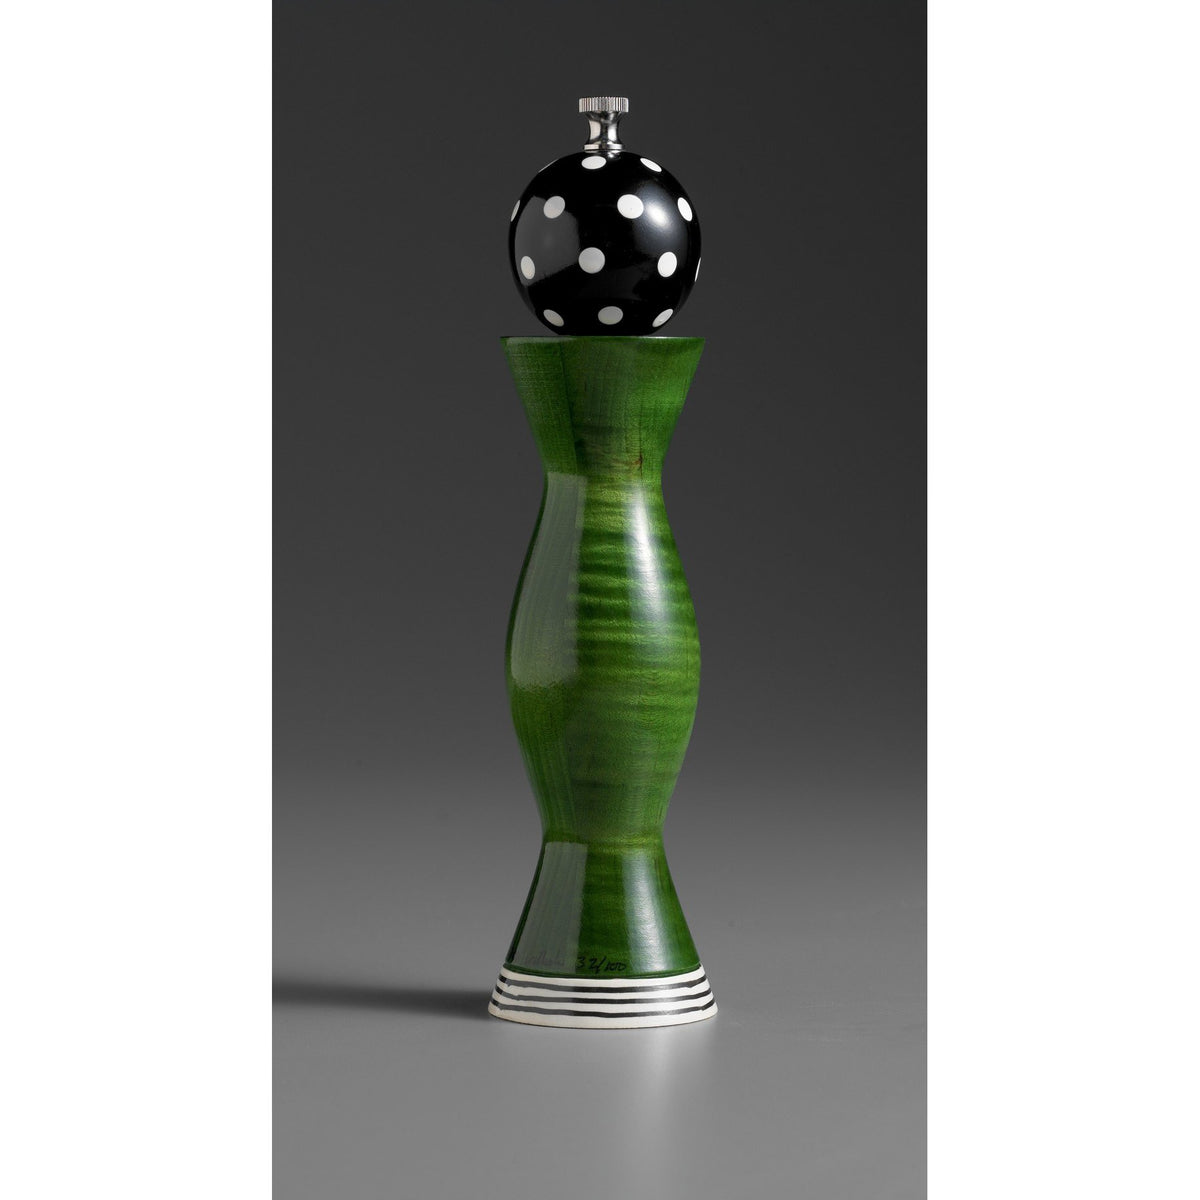 http://www.sweetheartgallery.com/cdn/shop/products/Wood_Salt_or_Pepper_Shaker_or_Mill_Grinder_Aero_in_Green_Black_and_White_by_Robert_Wilhelm_of_Raw_Design_Artistic_Artisan_Designer_Handmade_Wood_Salt_And_Pepper_Mills_Grinders_and_Sha_1200x1200.jpg?v=1590438198